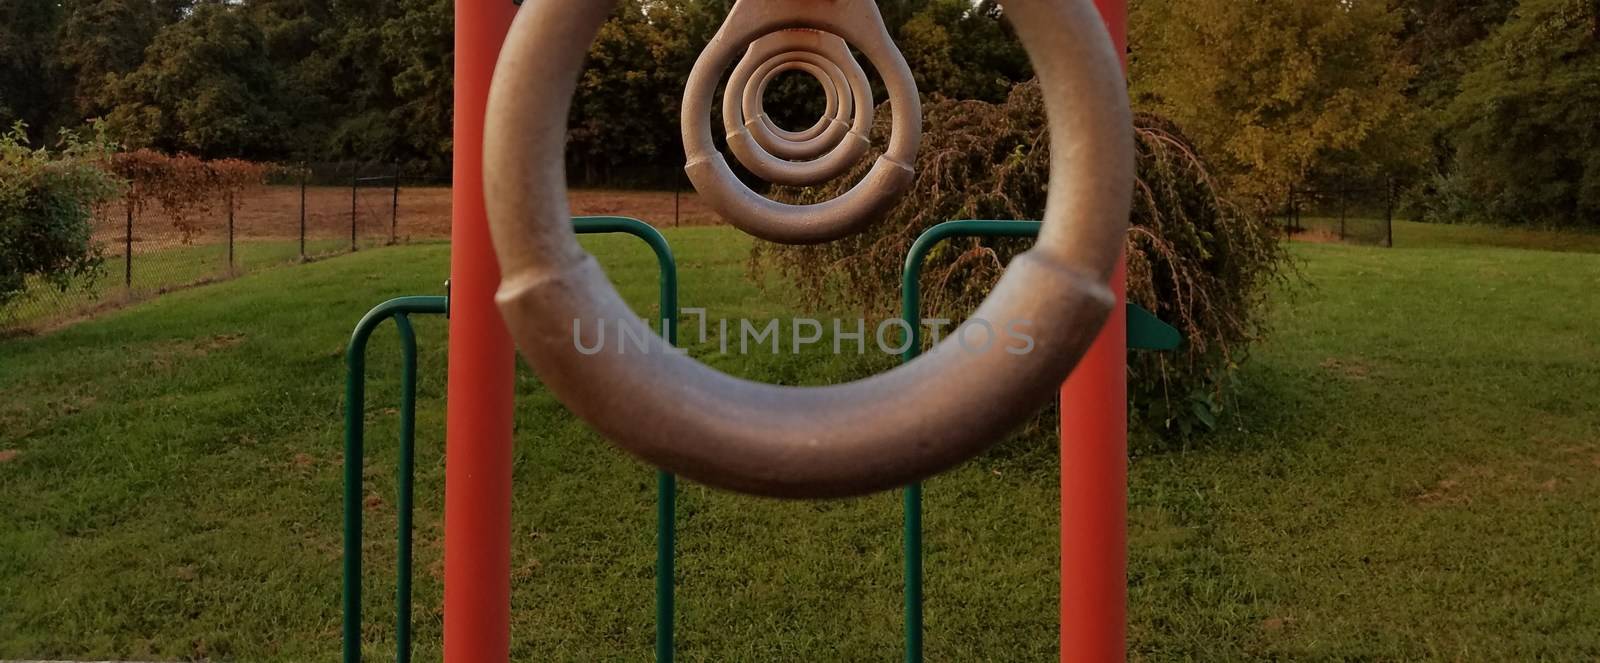 metal rings on a playground by stockphotofan1